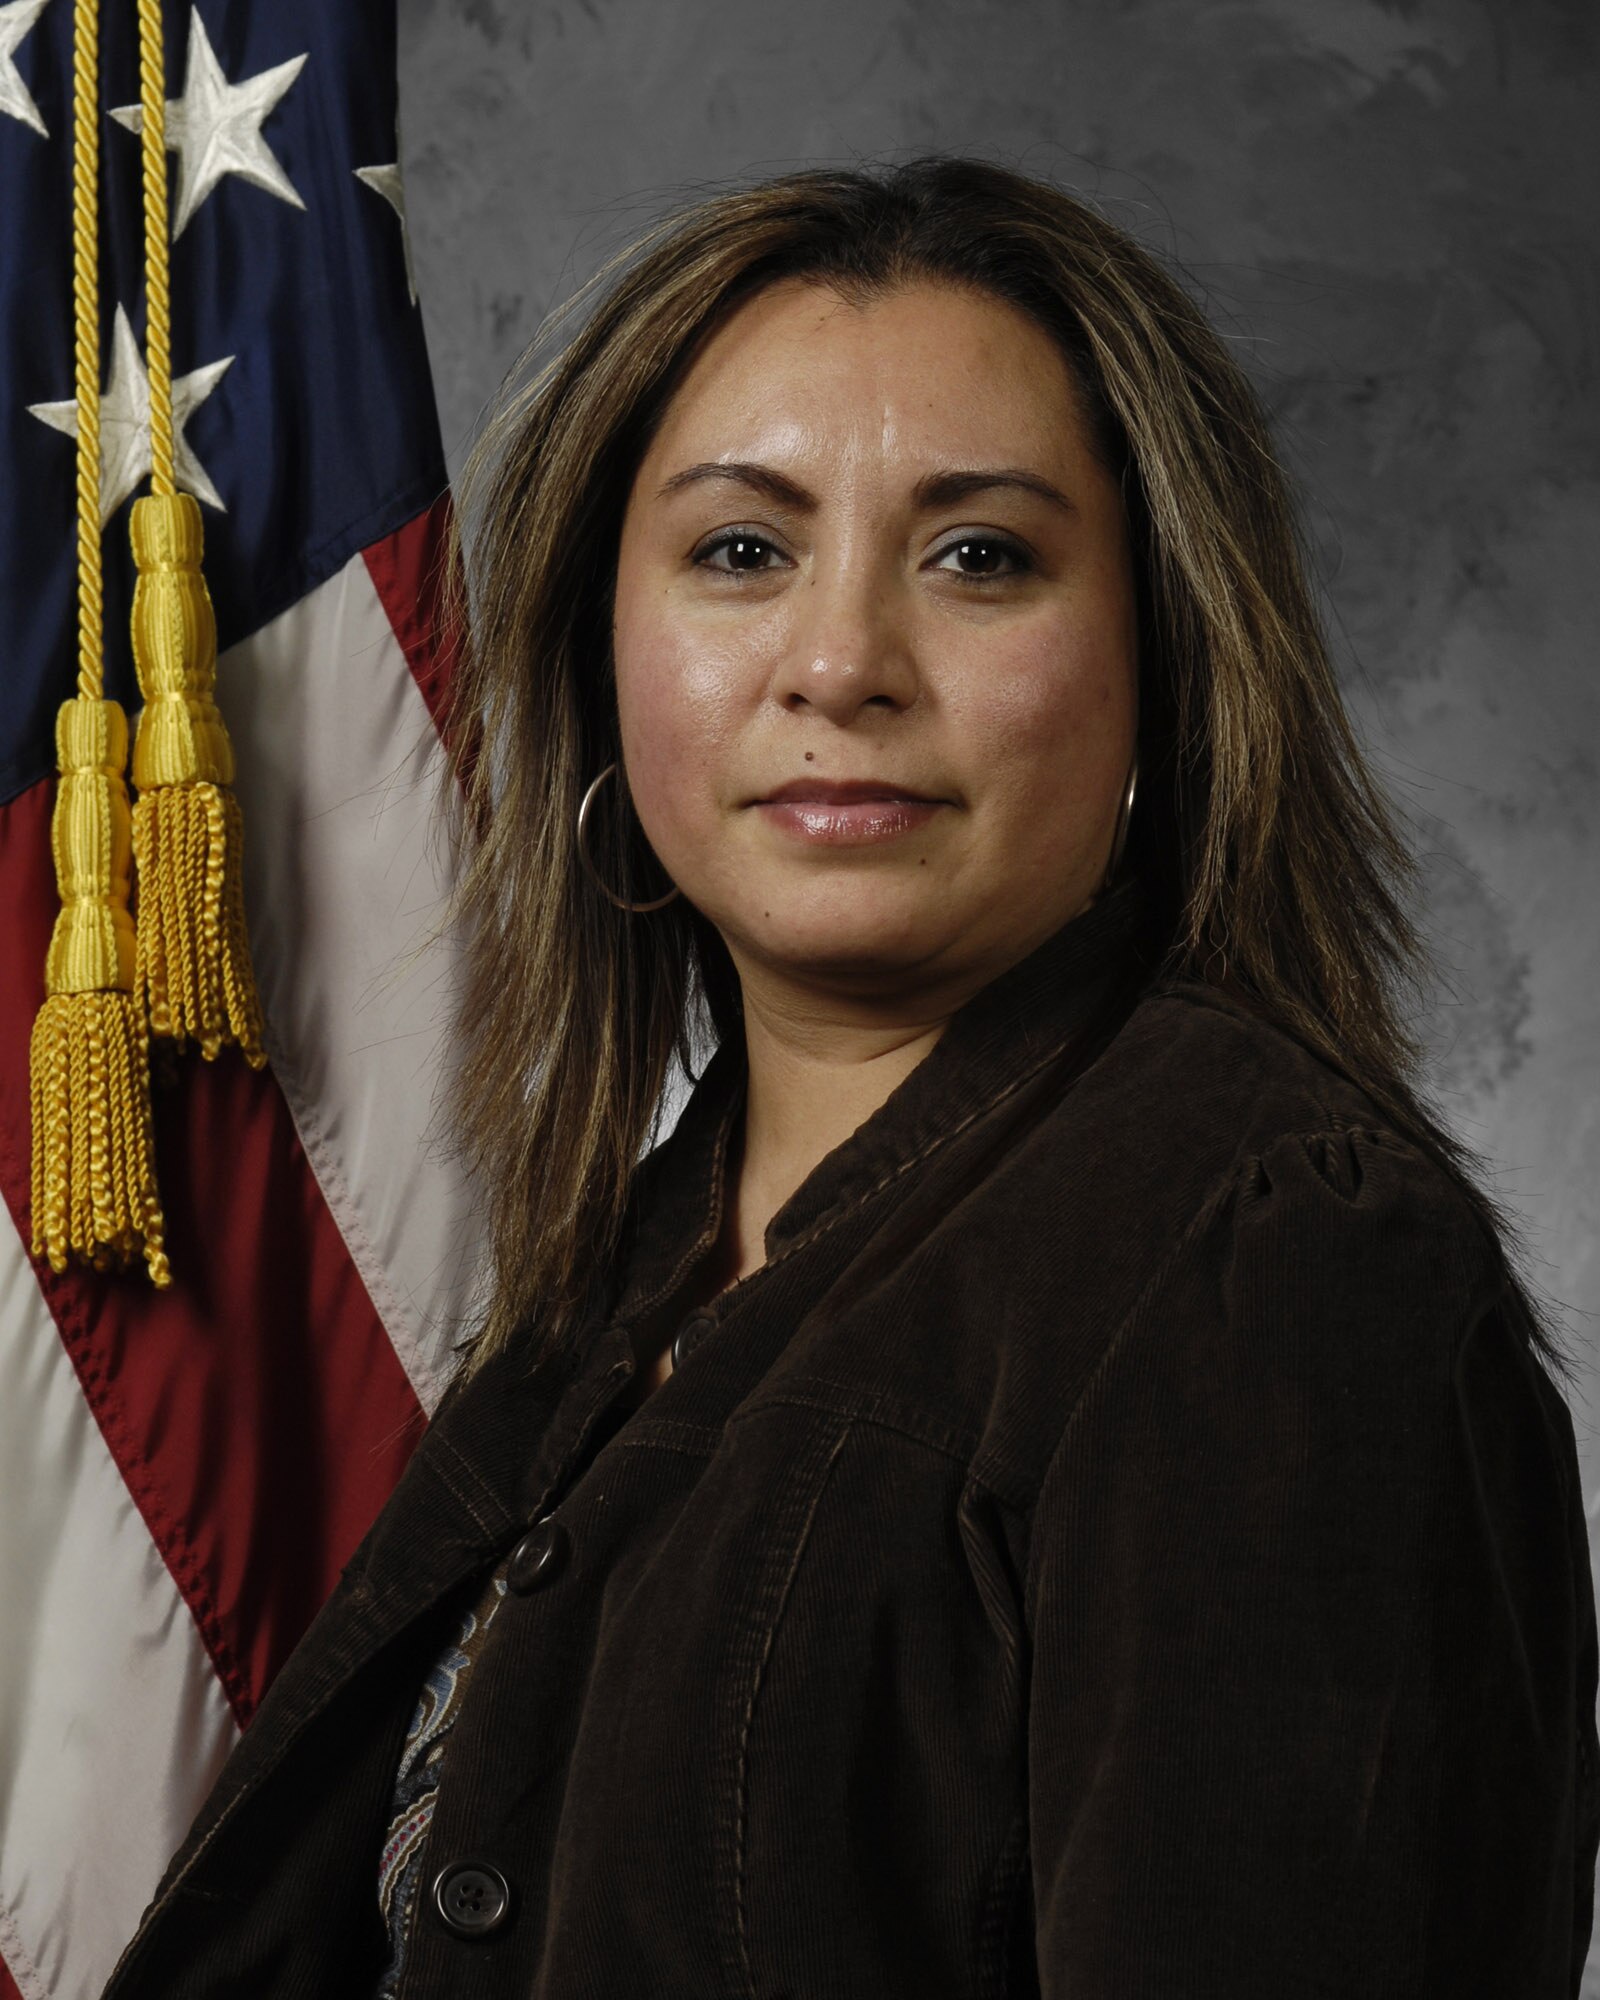 Rebecca Sanchez is a secretary for the 11th Services Squadron. She was the key project officer for the recent Eubank Evaluation Team visit. In 2008, she completely revamped the 11th Services administrative section, updating file plans and bulletin boards with 100 percent accuracy. She developed automated internal controls for 26 activities and improved suspenses from 85 to 100 percent compliancy. (U.S. Air Force photo by Senior Airman Sean Adams)